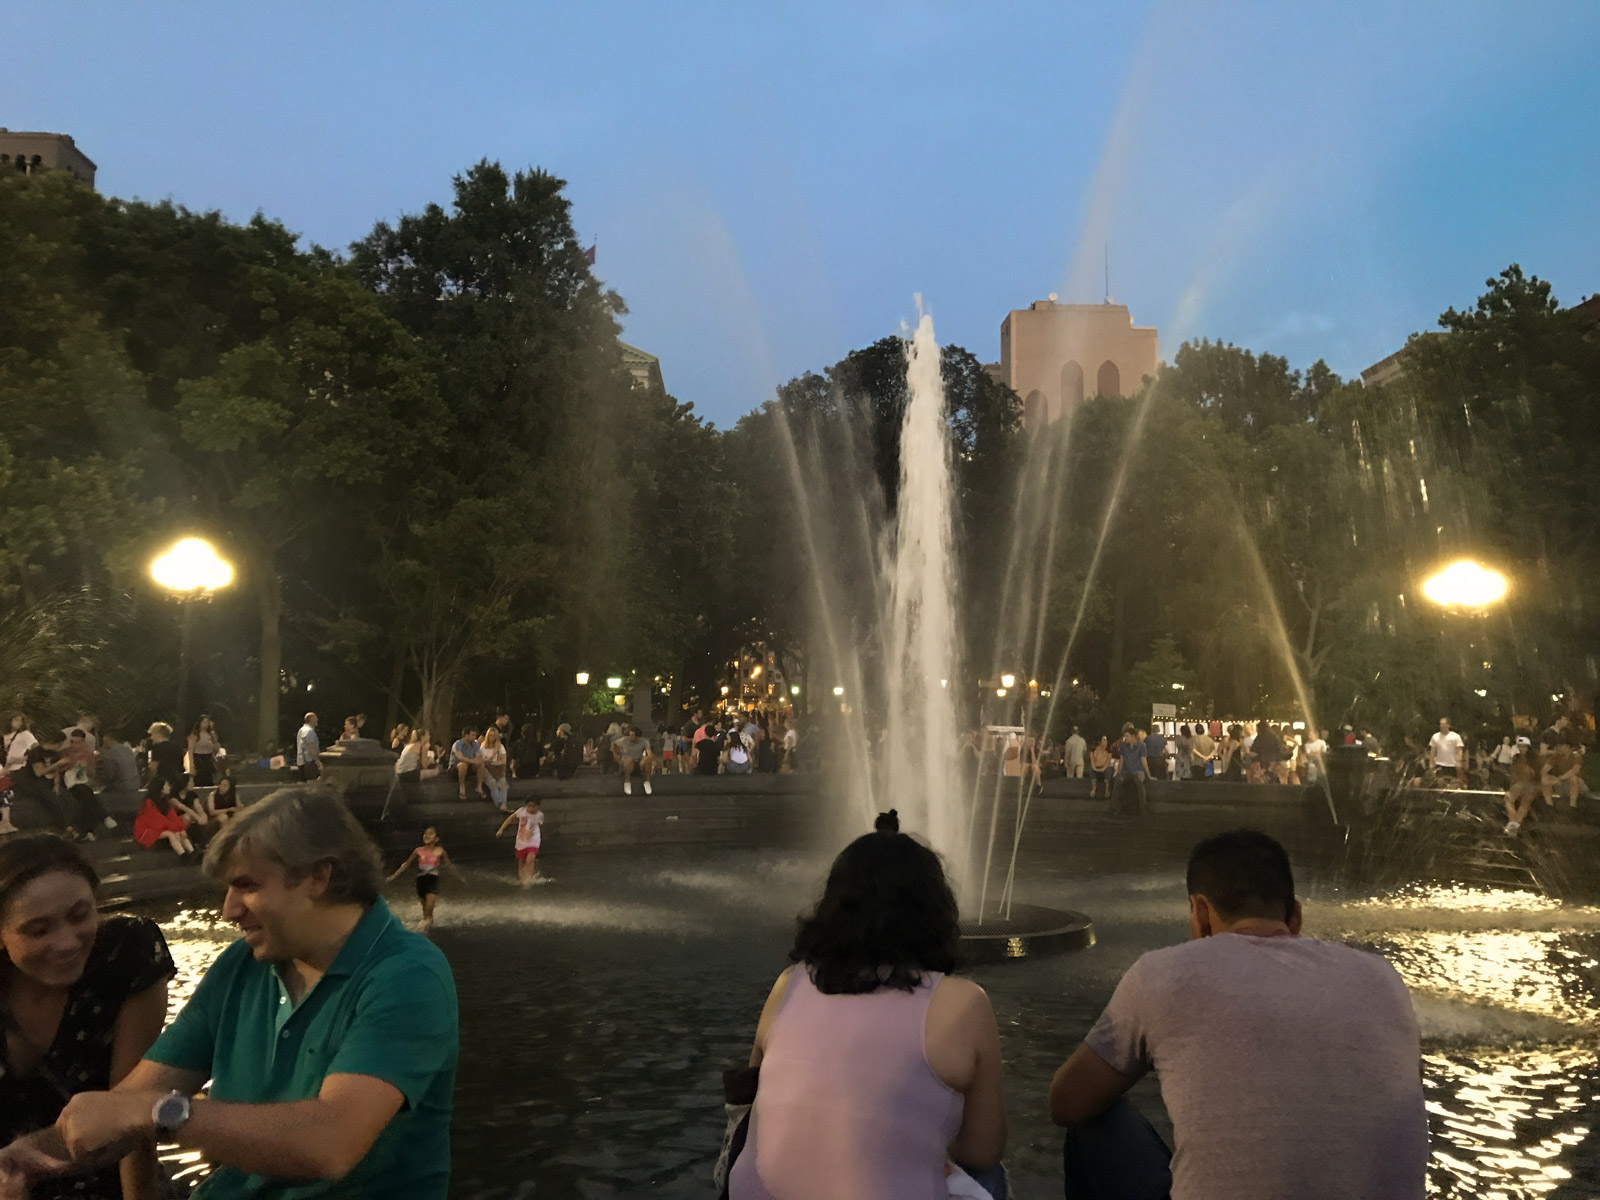 A nighttime view of many people sitting around a fountain. The fountain is active and jetting water.